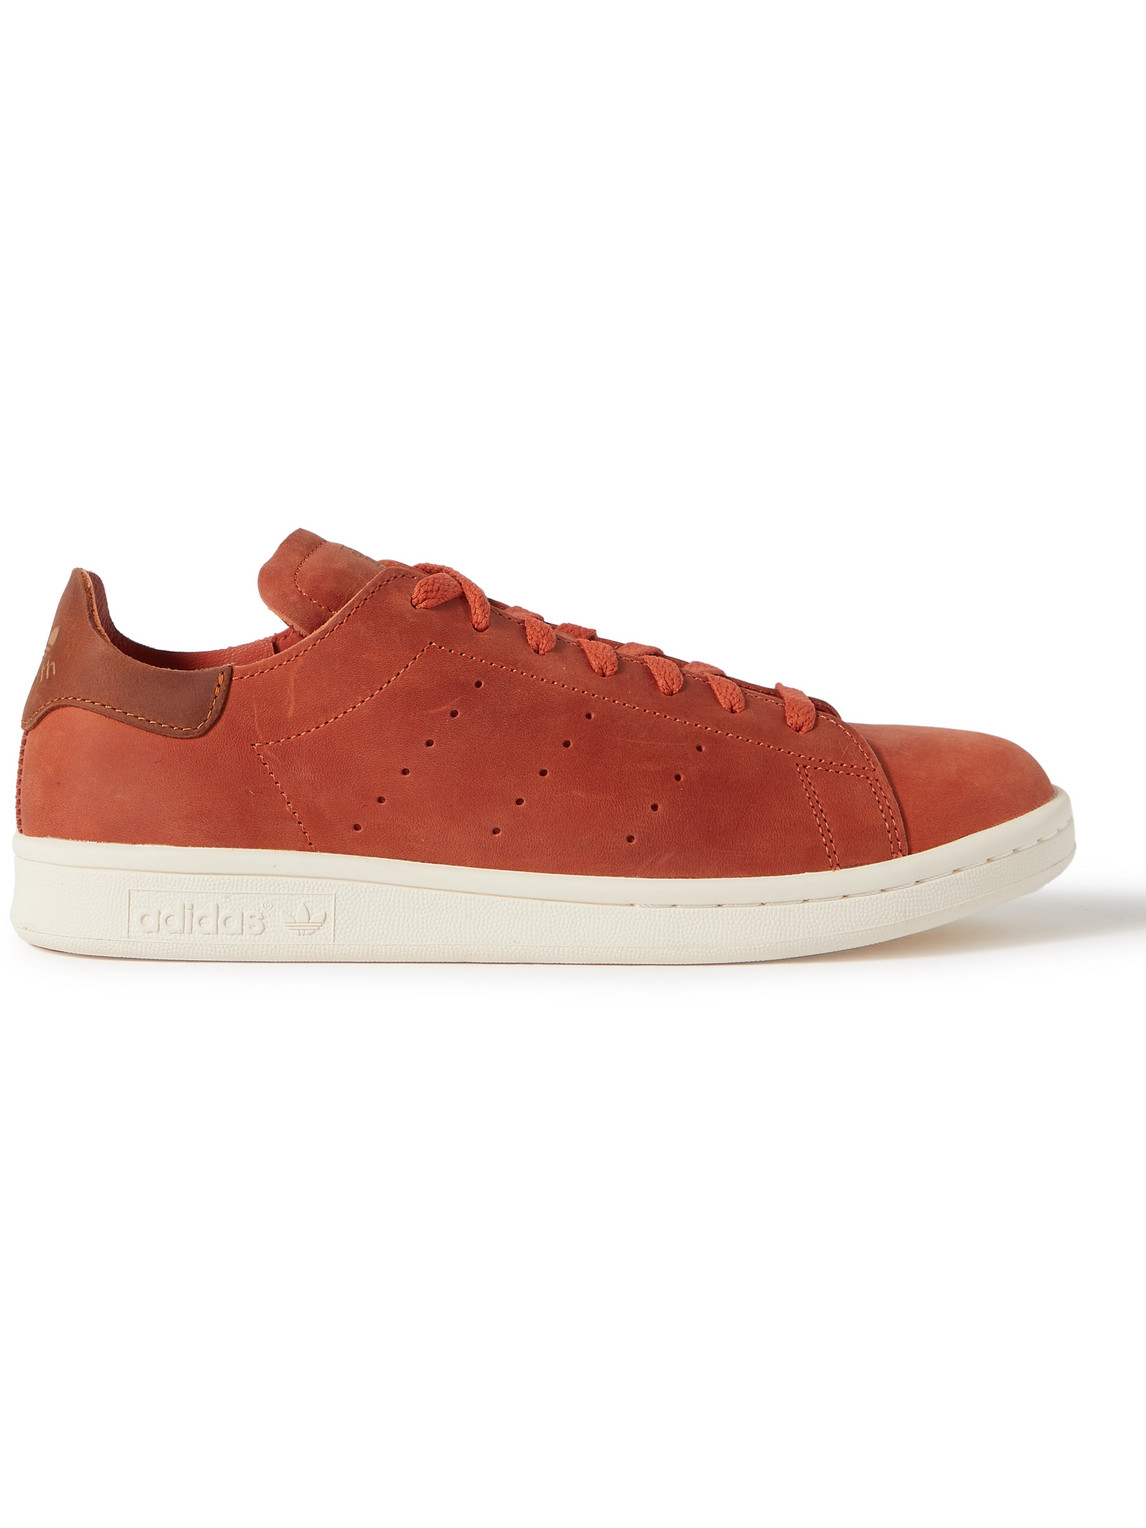 Adidas Originals Stan Smith Recon Leather Sneakers In Red | ModeSens